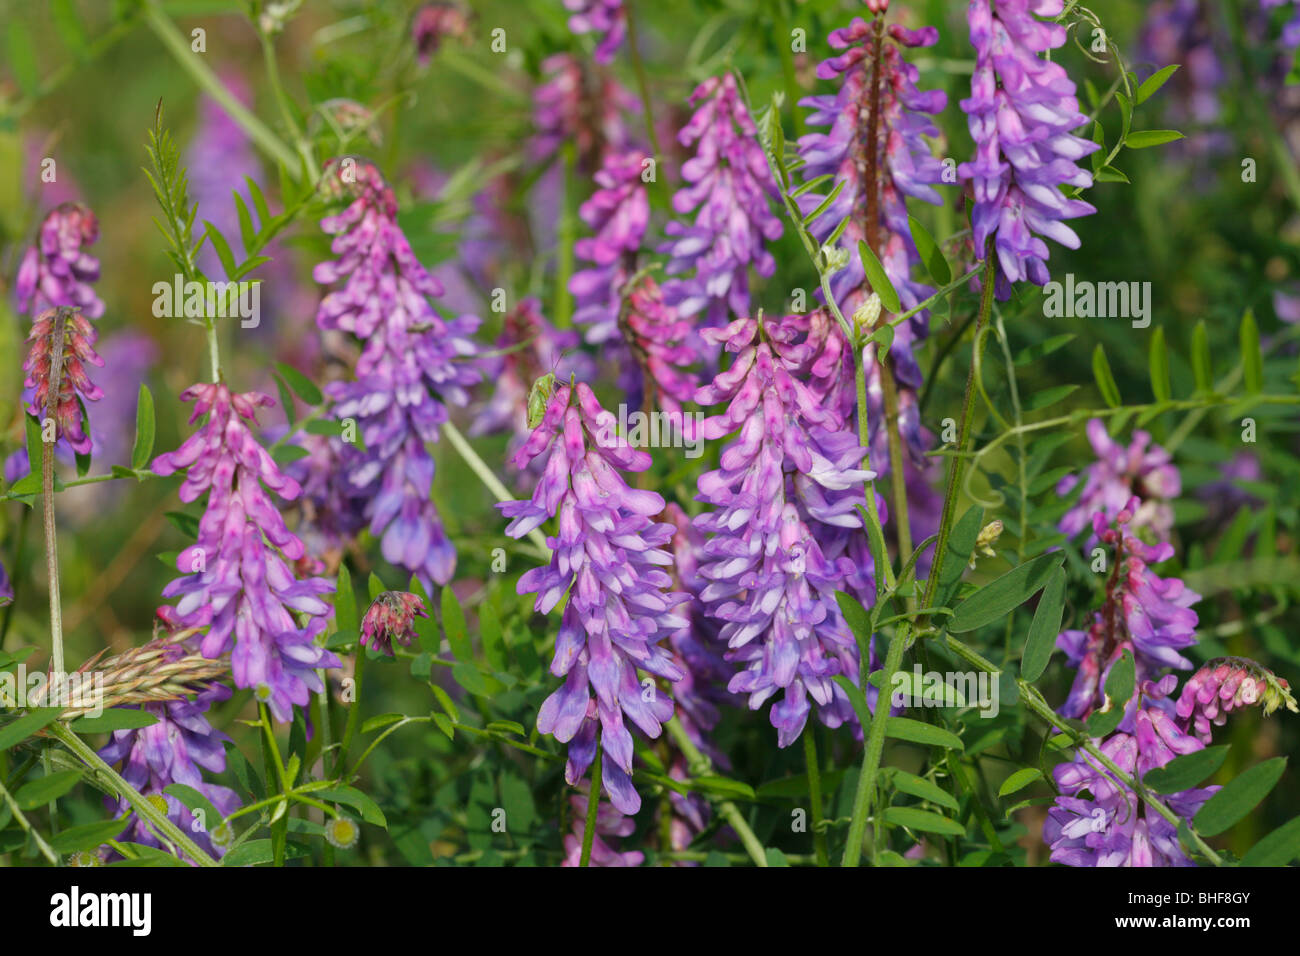 Flowers of Tufted Vetch (Vicia cracca). Powys, Wales. Stock Photo